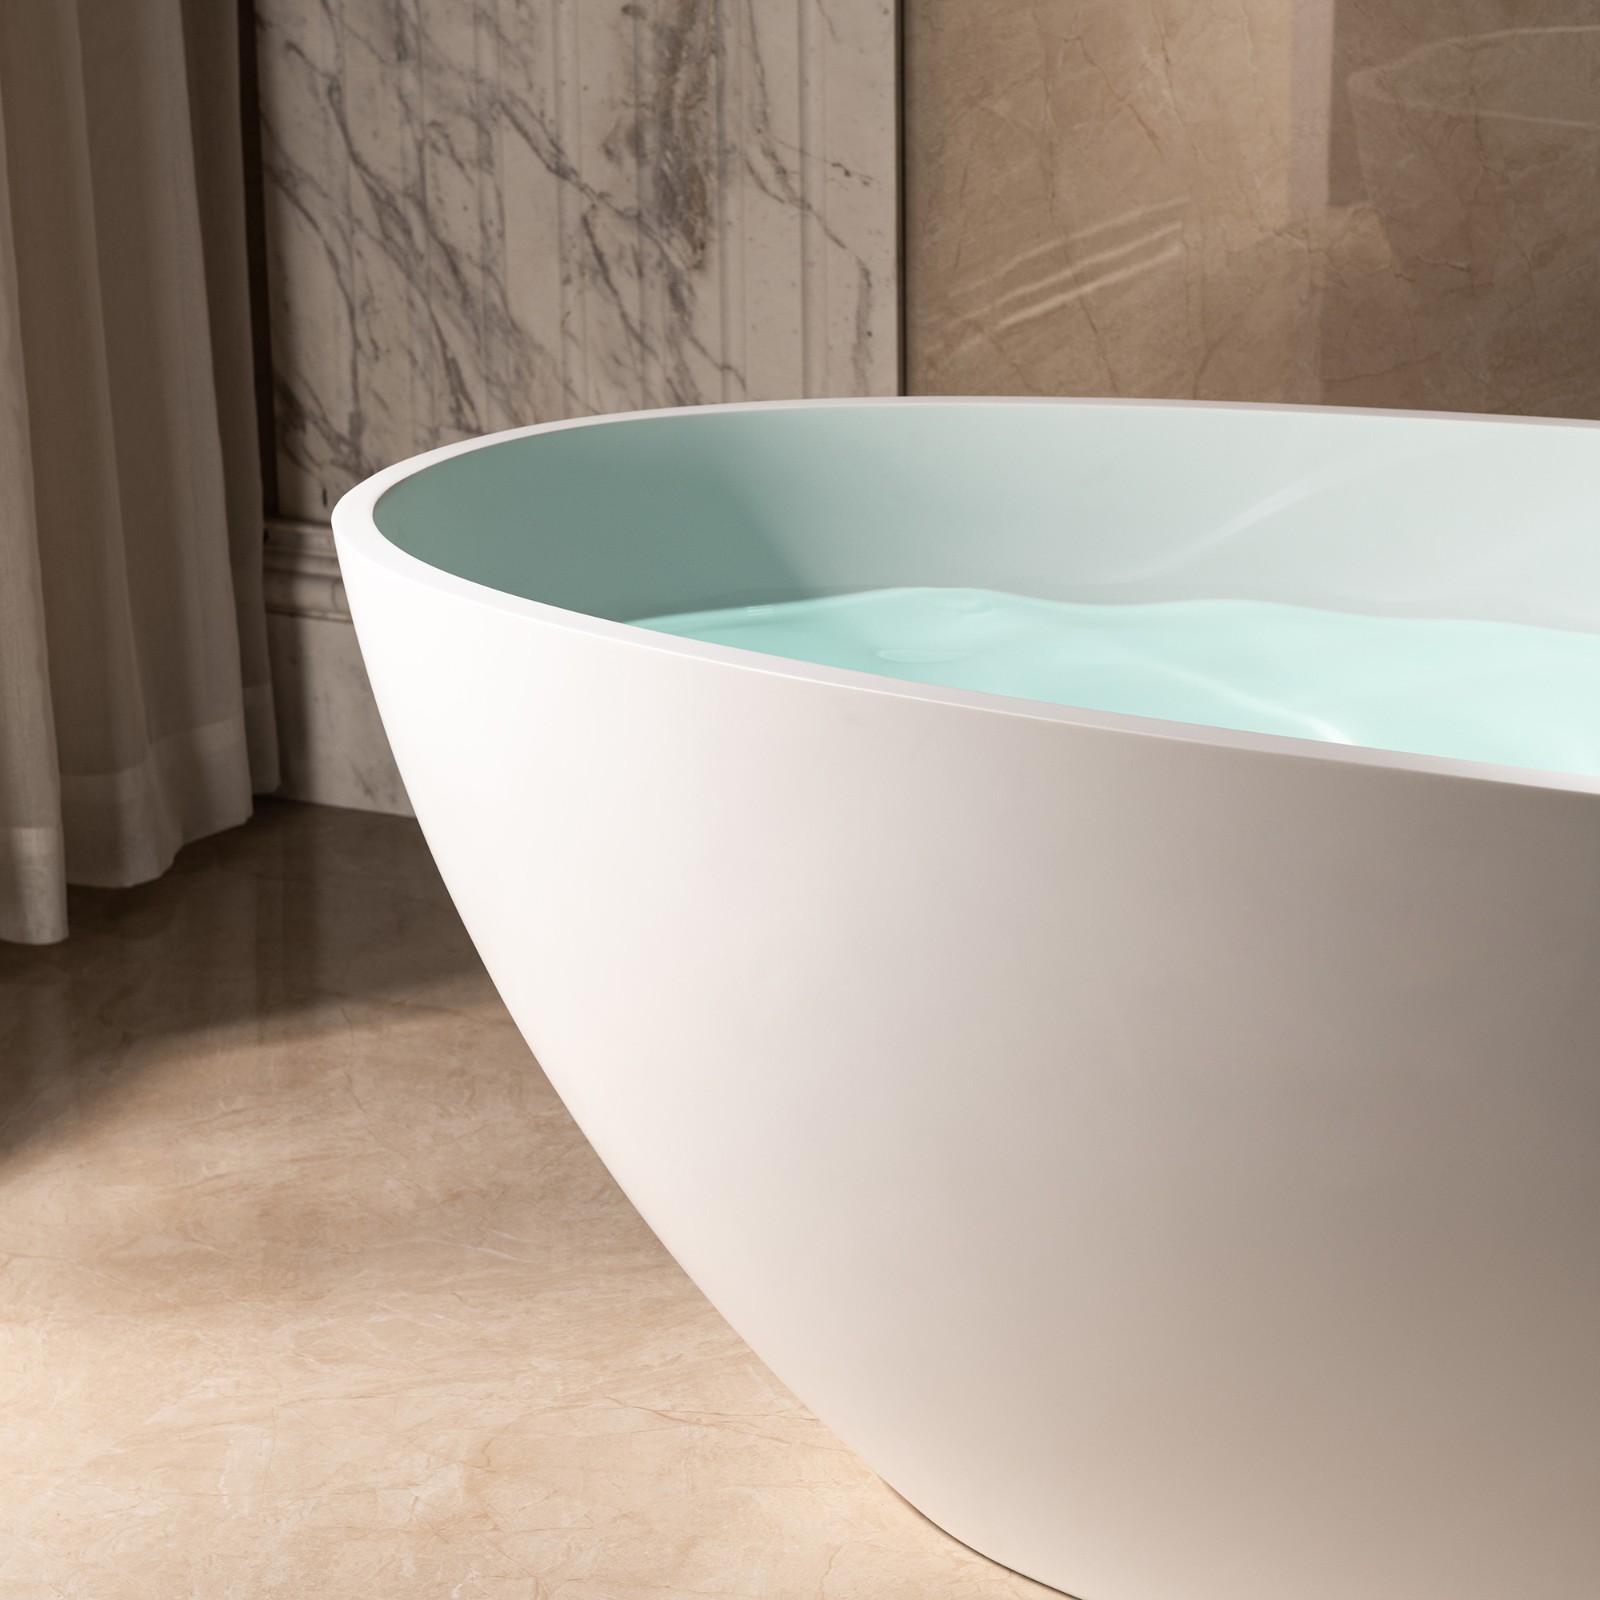  WOODBRIDGE 67 in. x 30.75 in. Luxury Contemporary Solid Surface Freestanding Bathtub in Matte White_606